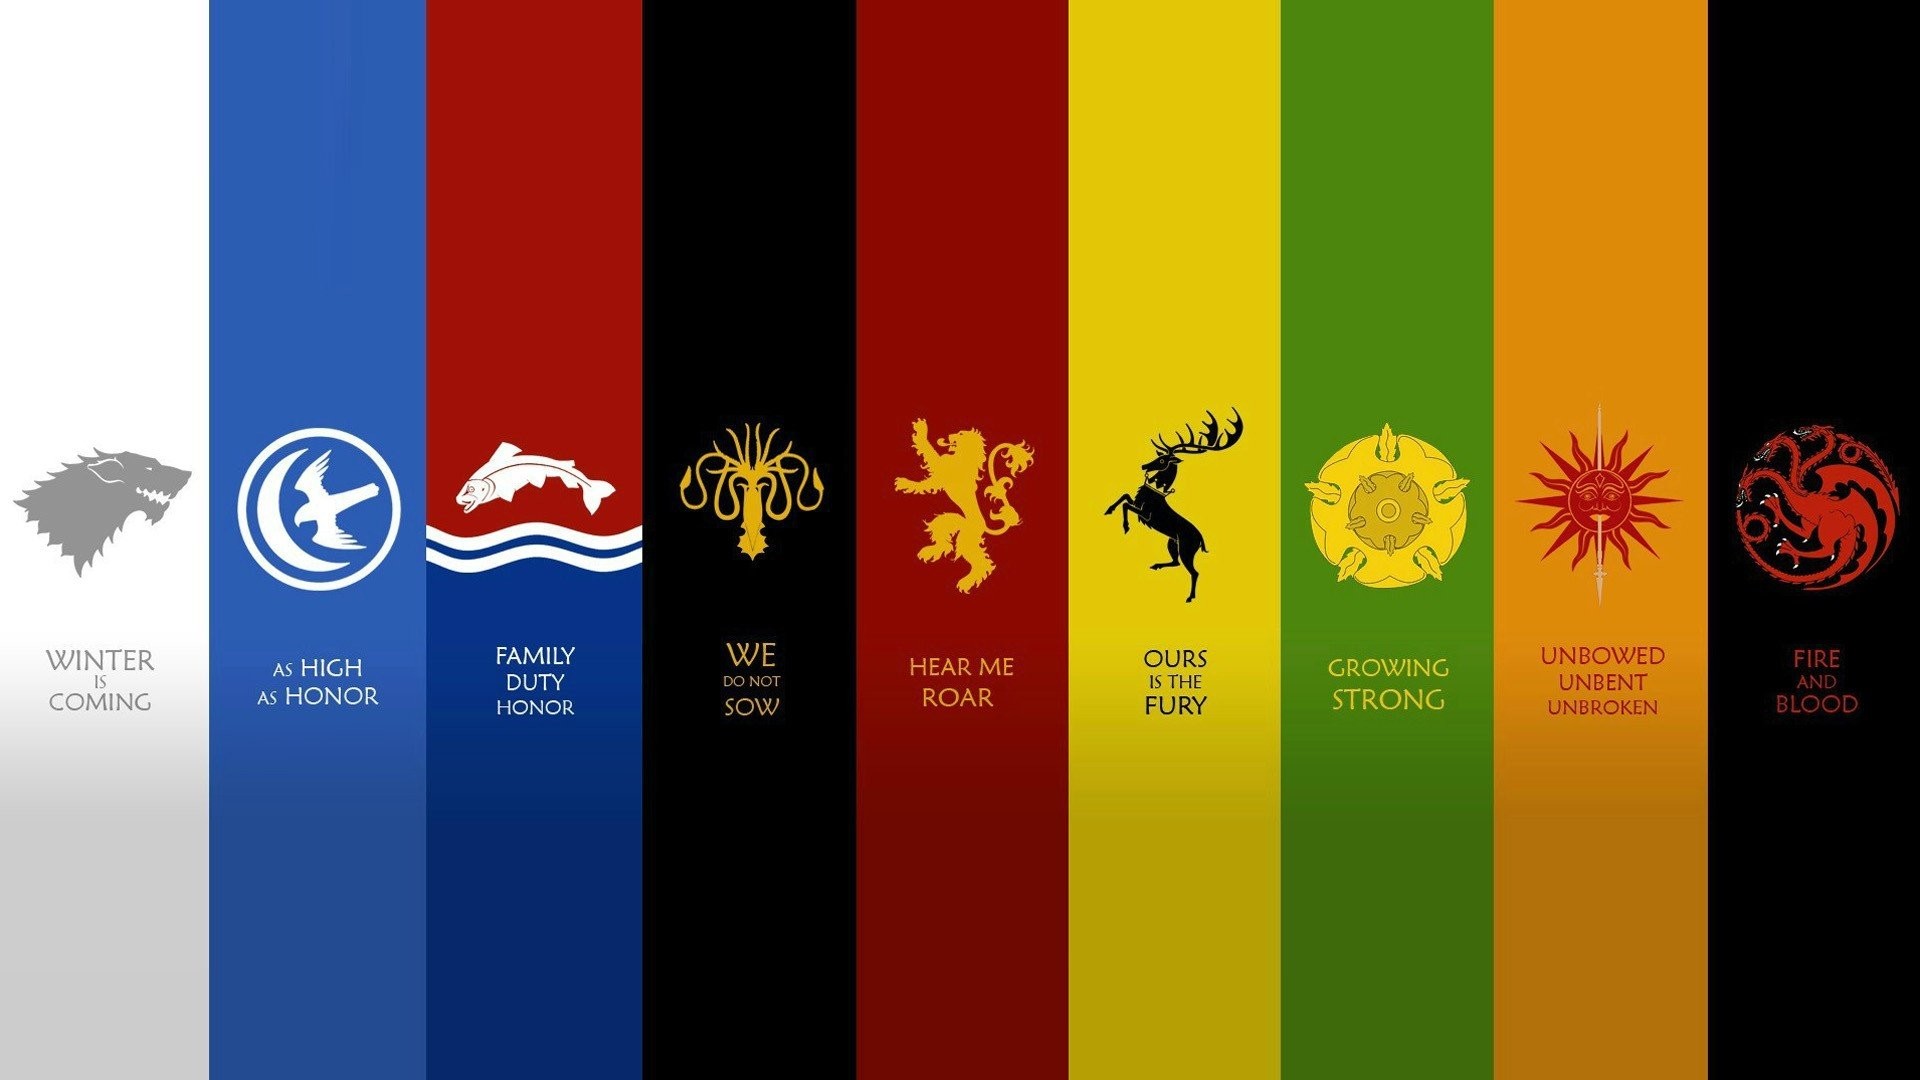 1920x1080 A Song Of Ice And Fire Emblems Fantasy Art Game Thrones George R. Martin  House Arryn Baratheon Greyjoy Lannister Mormont Houses Stark Targaryen  Tully Quotes